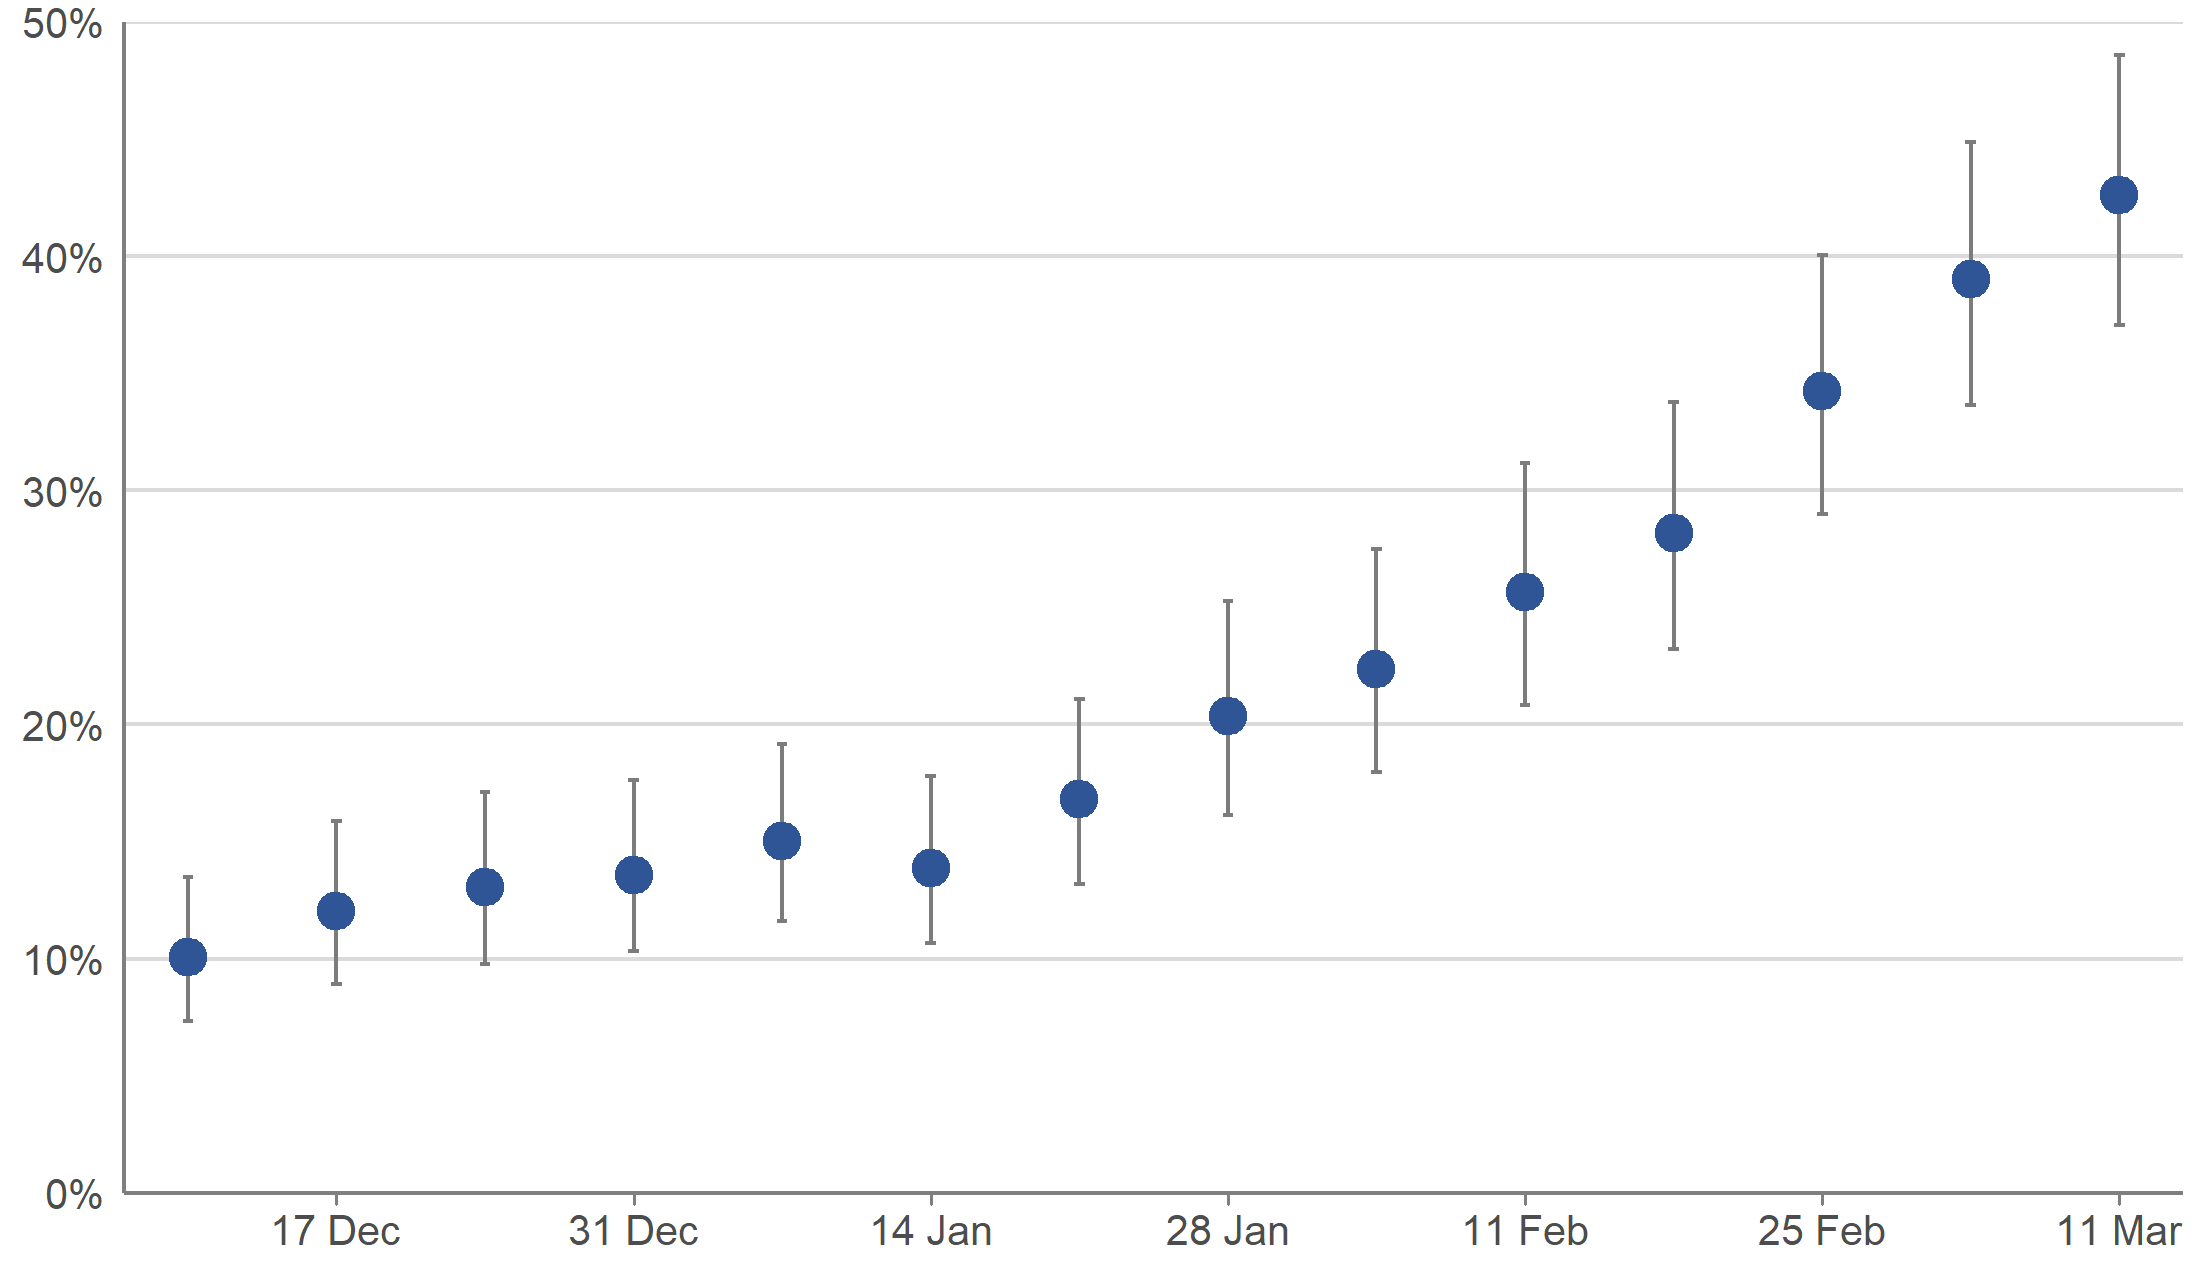 The chart shows modelled weekly percentages of people testing positive for antibodies to SARS-CoV-2 from a blood sample, from 7 December 2020 to 14 March 2021, including 95% credible intervals. Modelled estimates suggest there has been an increase in antibody positivity in the week 8 to 14 March 2021 in Scotland.